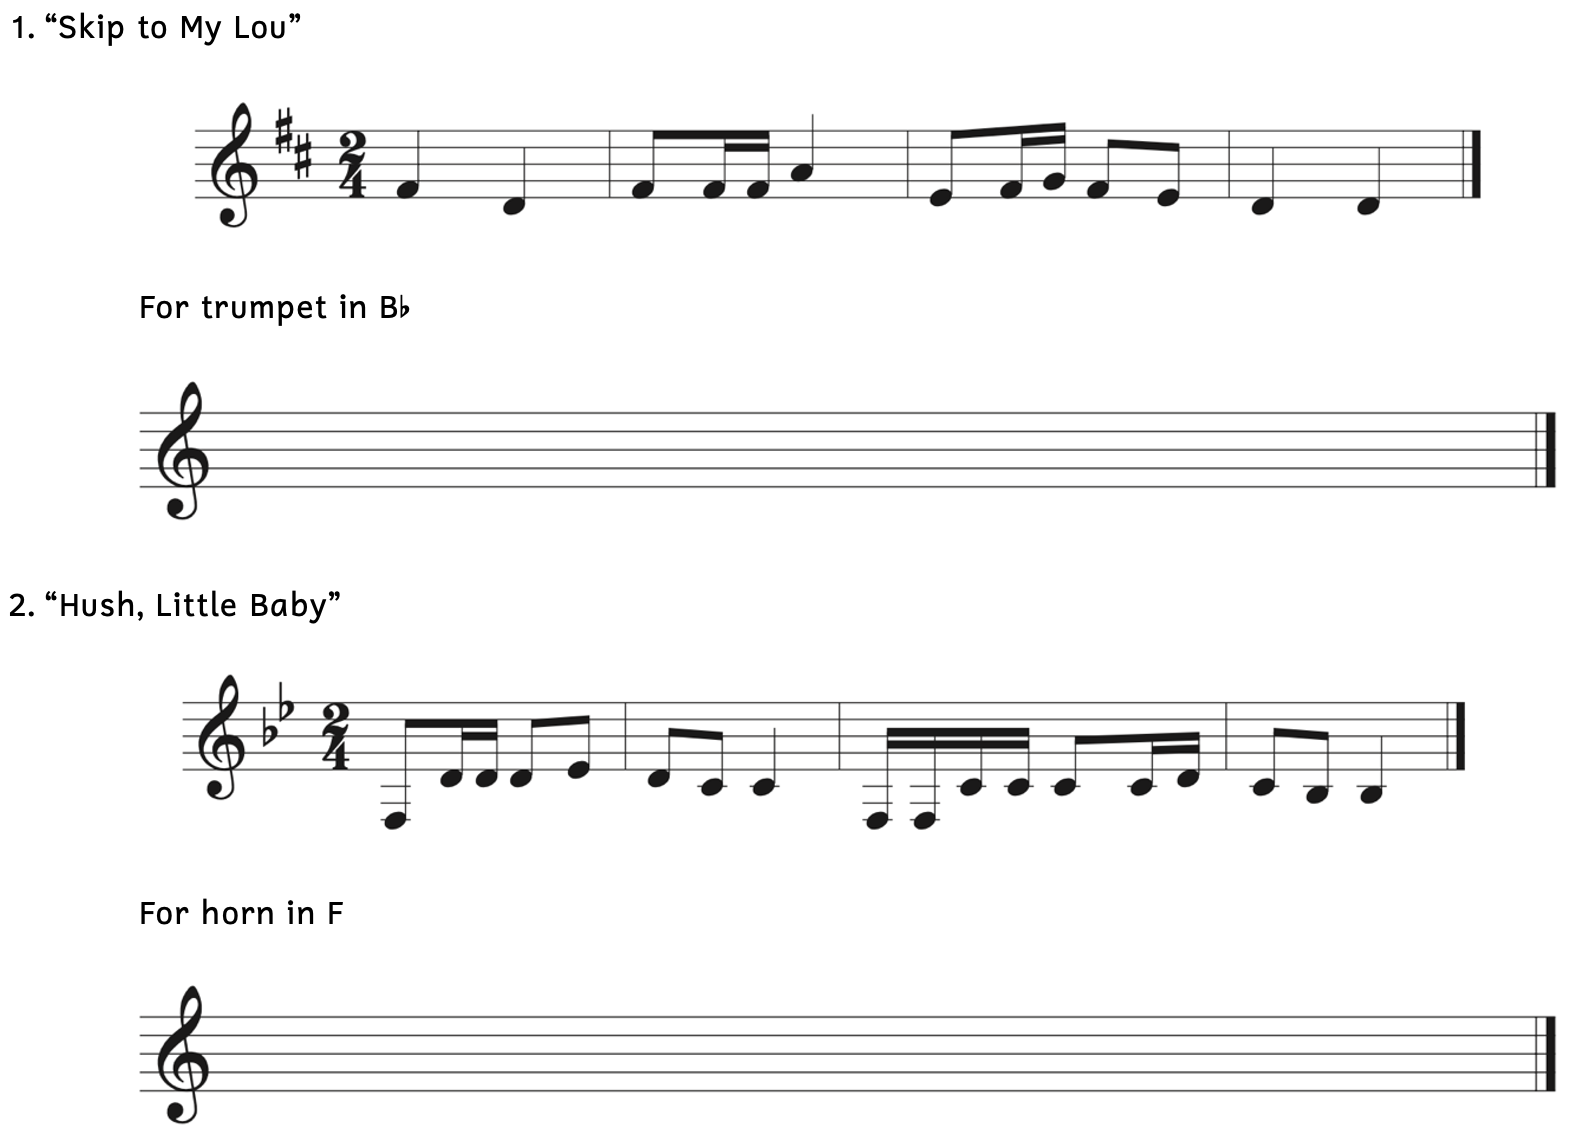 Number 1 shows "Skip to My Lou" in D major beginning on F-sharp4. Add a key signature, and write the melody for trumpet in B-flat. Number 2 shows "Hush, Little Baby" in B-flat major beginning on F3. Do not add a key signature, and write the melody for horn in F.